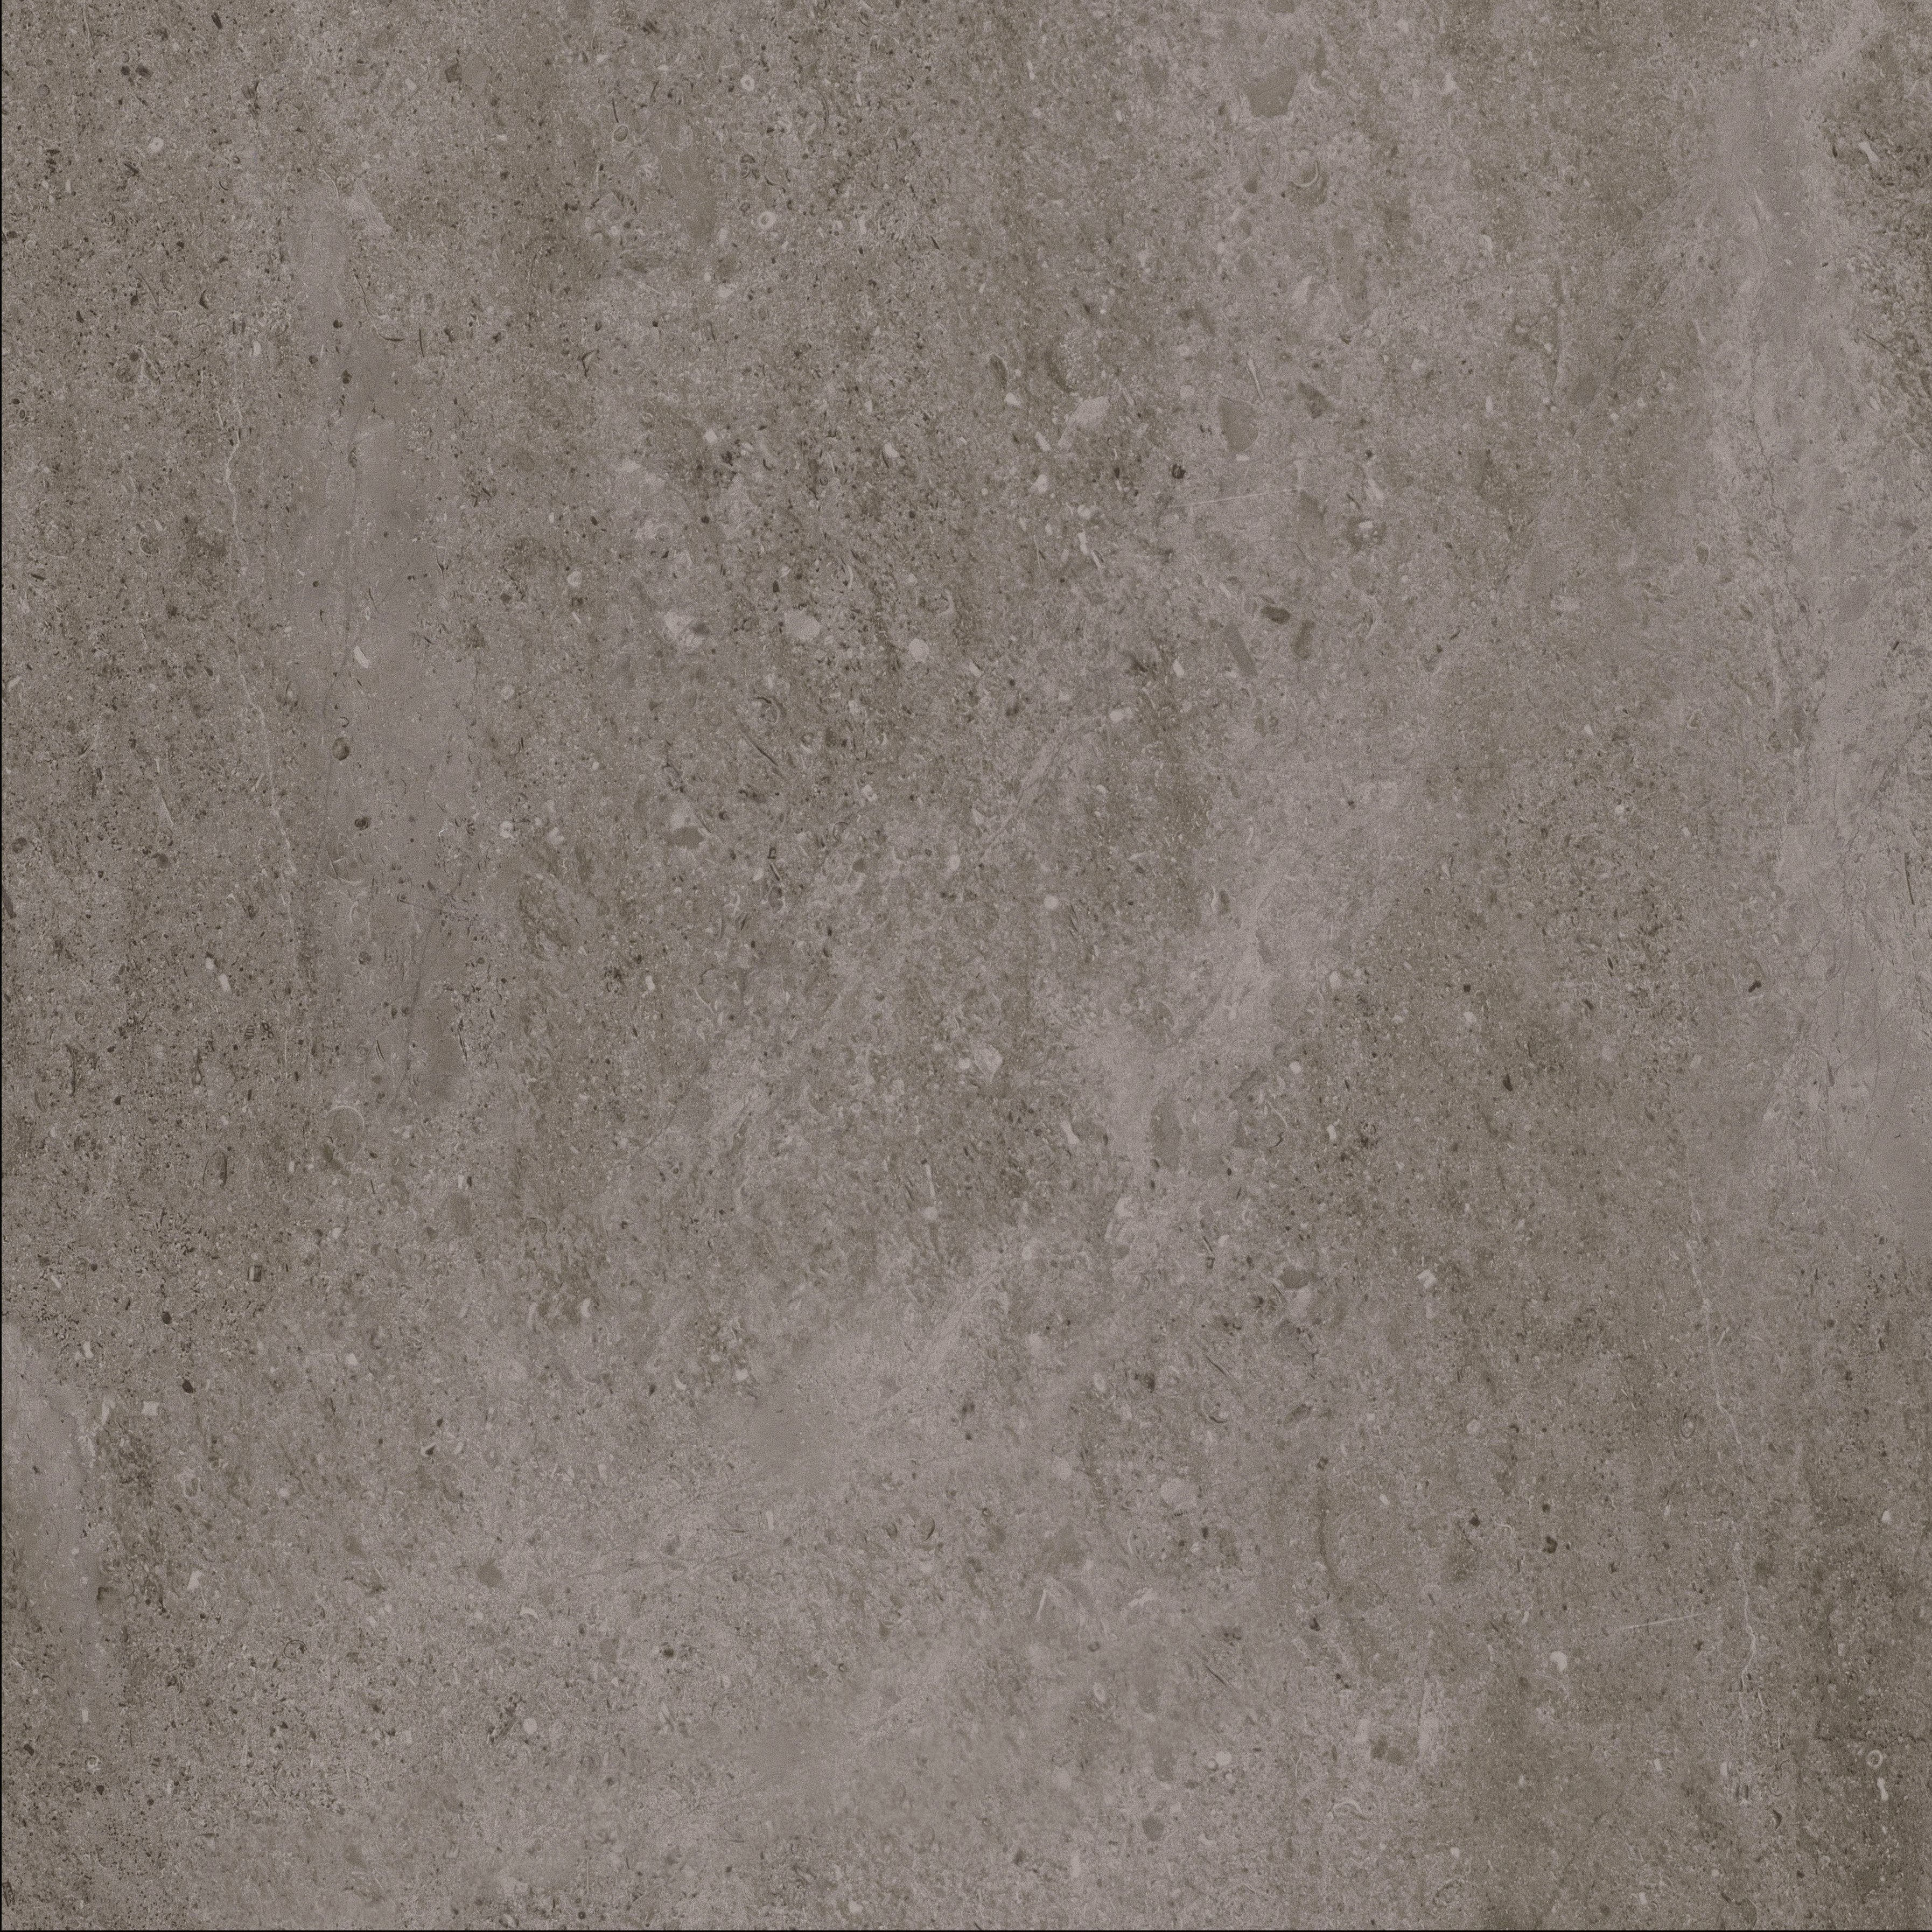 Natural Creations XL - Polished Concrete Dark Grey 5.0mm